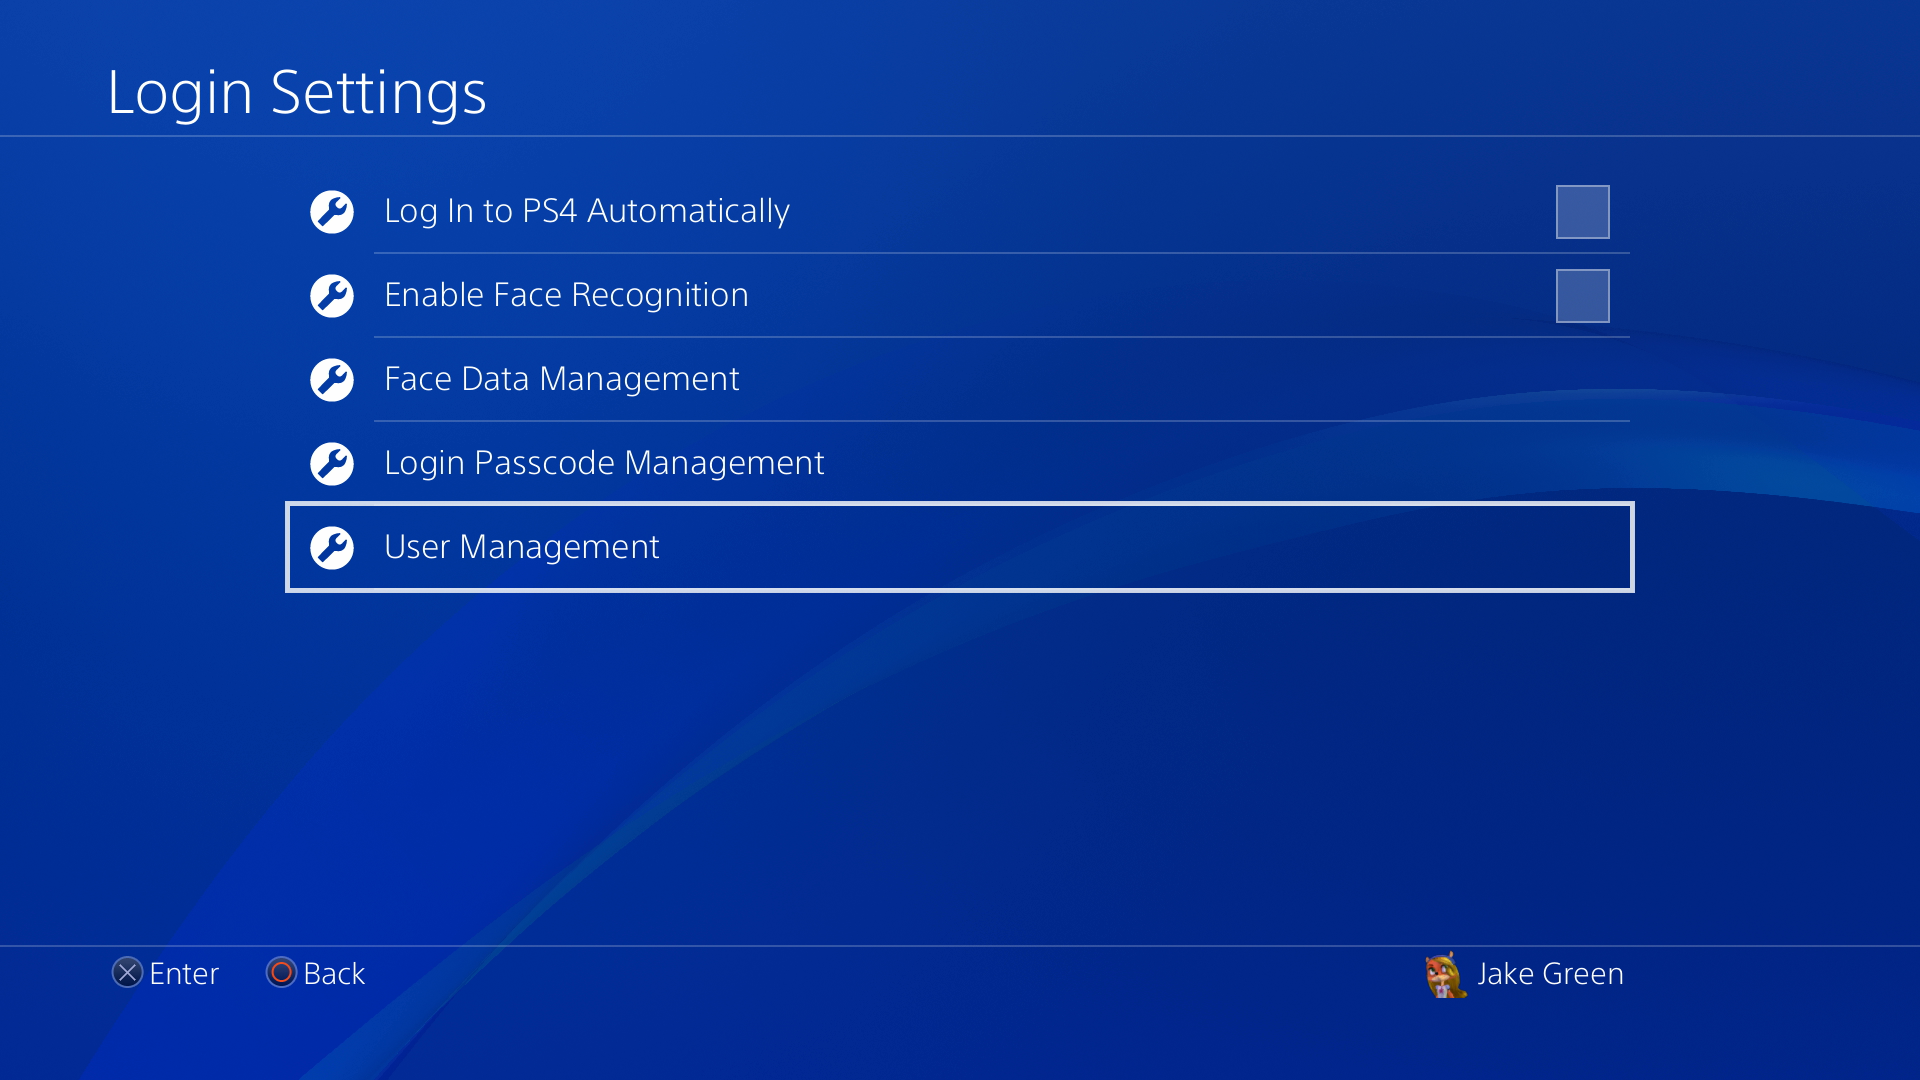 Hereâs How to Delete a PS4 Account